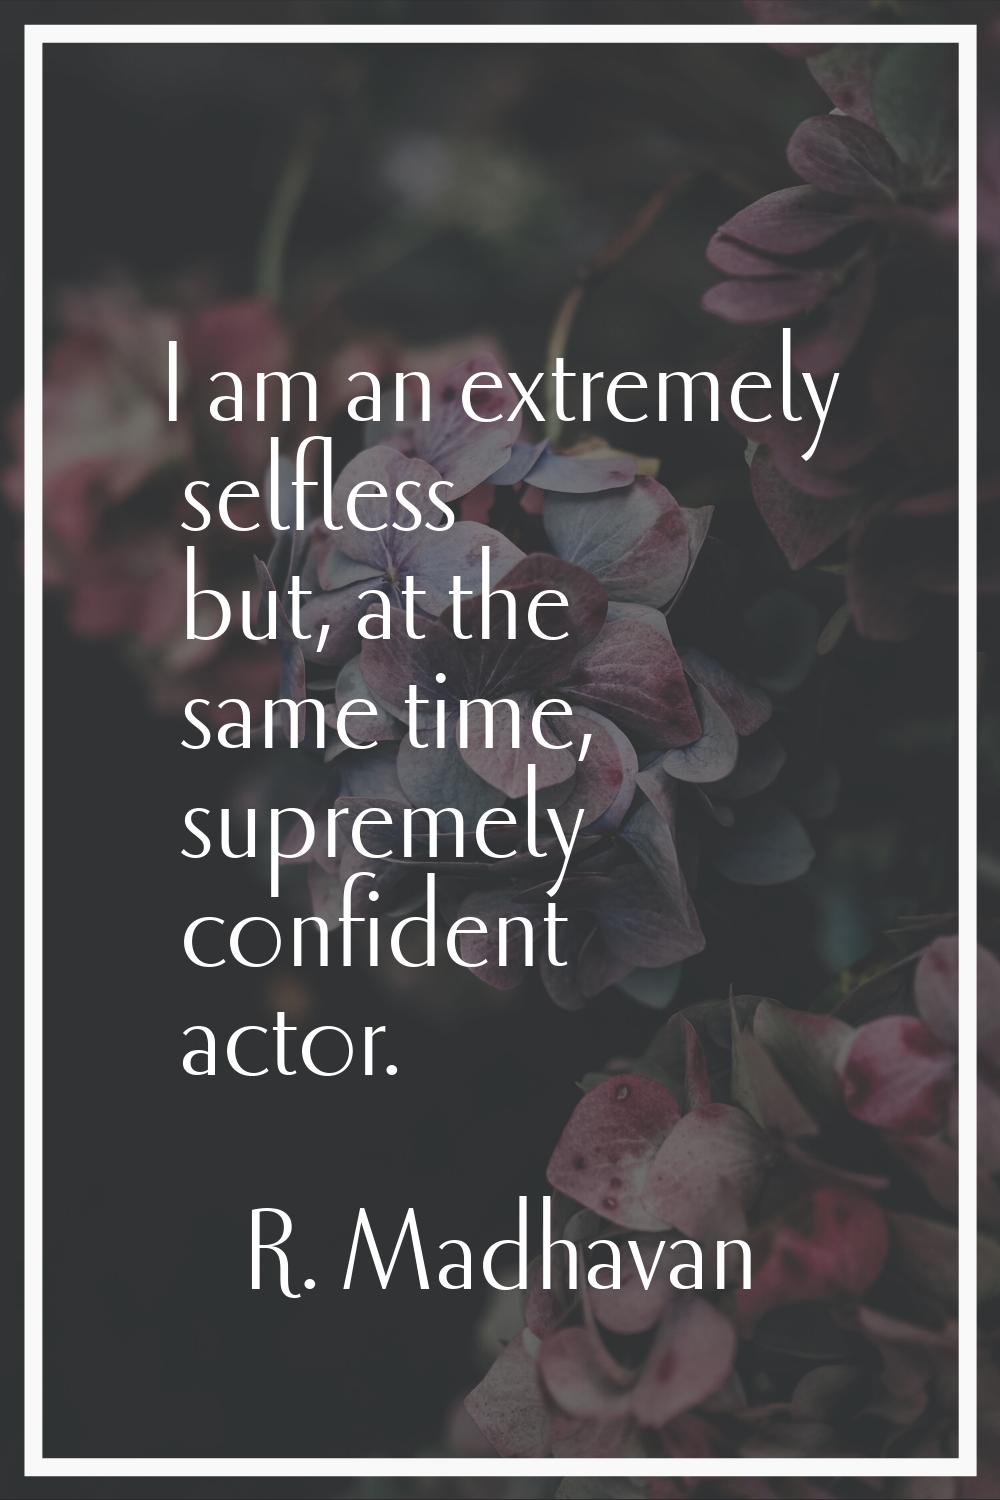 I am an extremely selfless but, at the same time, supremely confident actor.